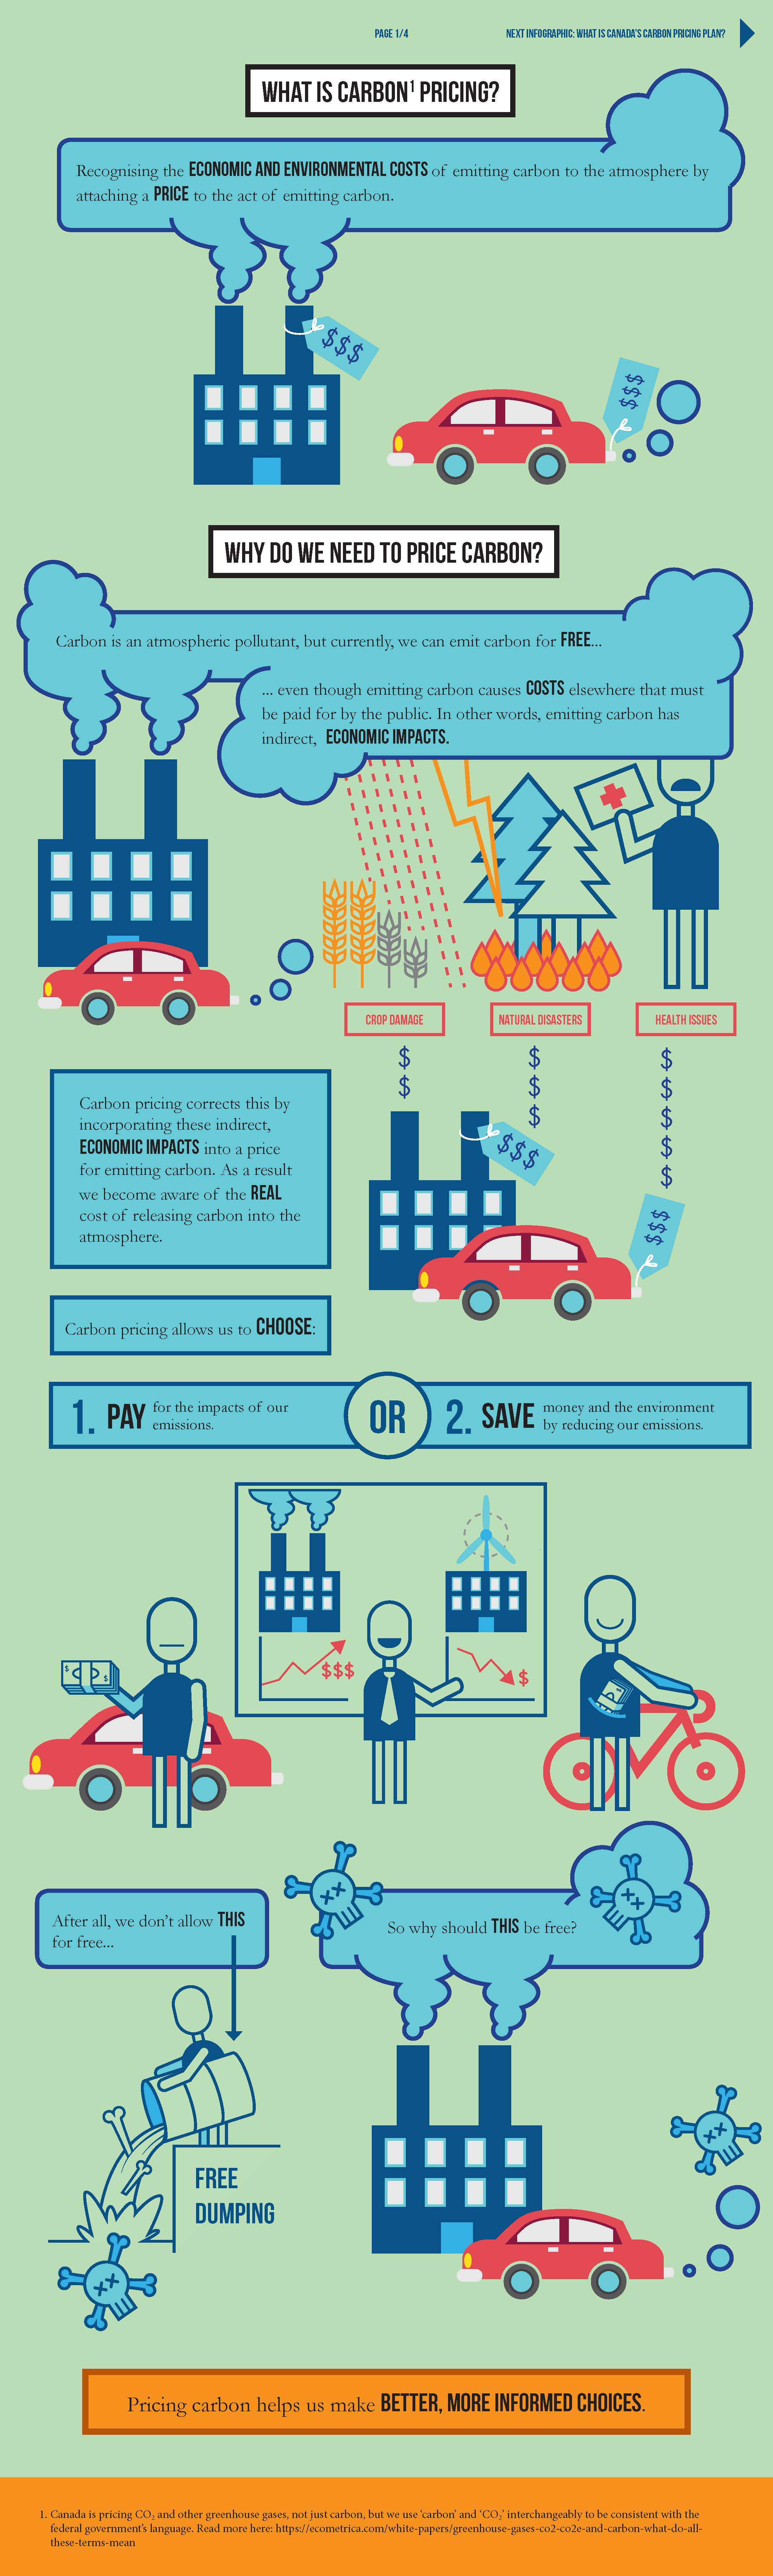 Graphic 1: What is Carbon Pricing?